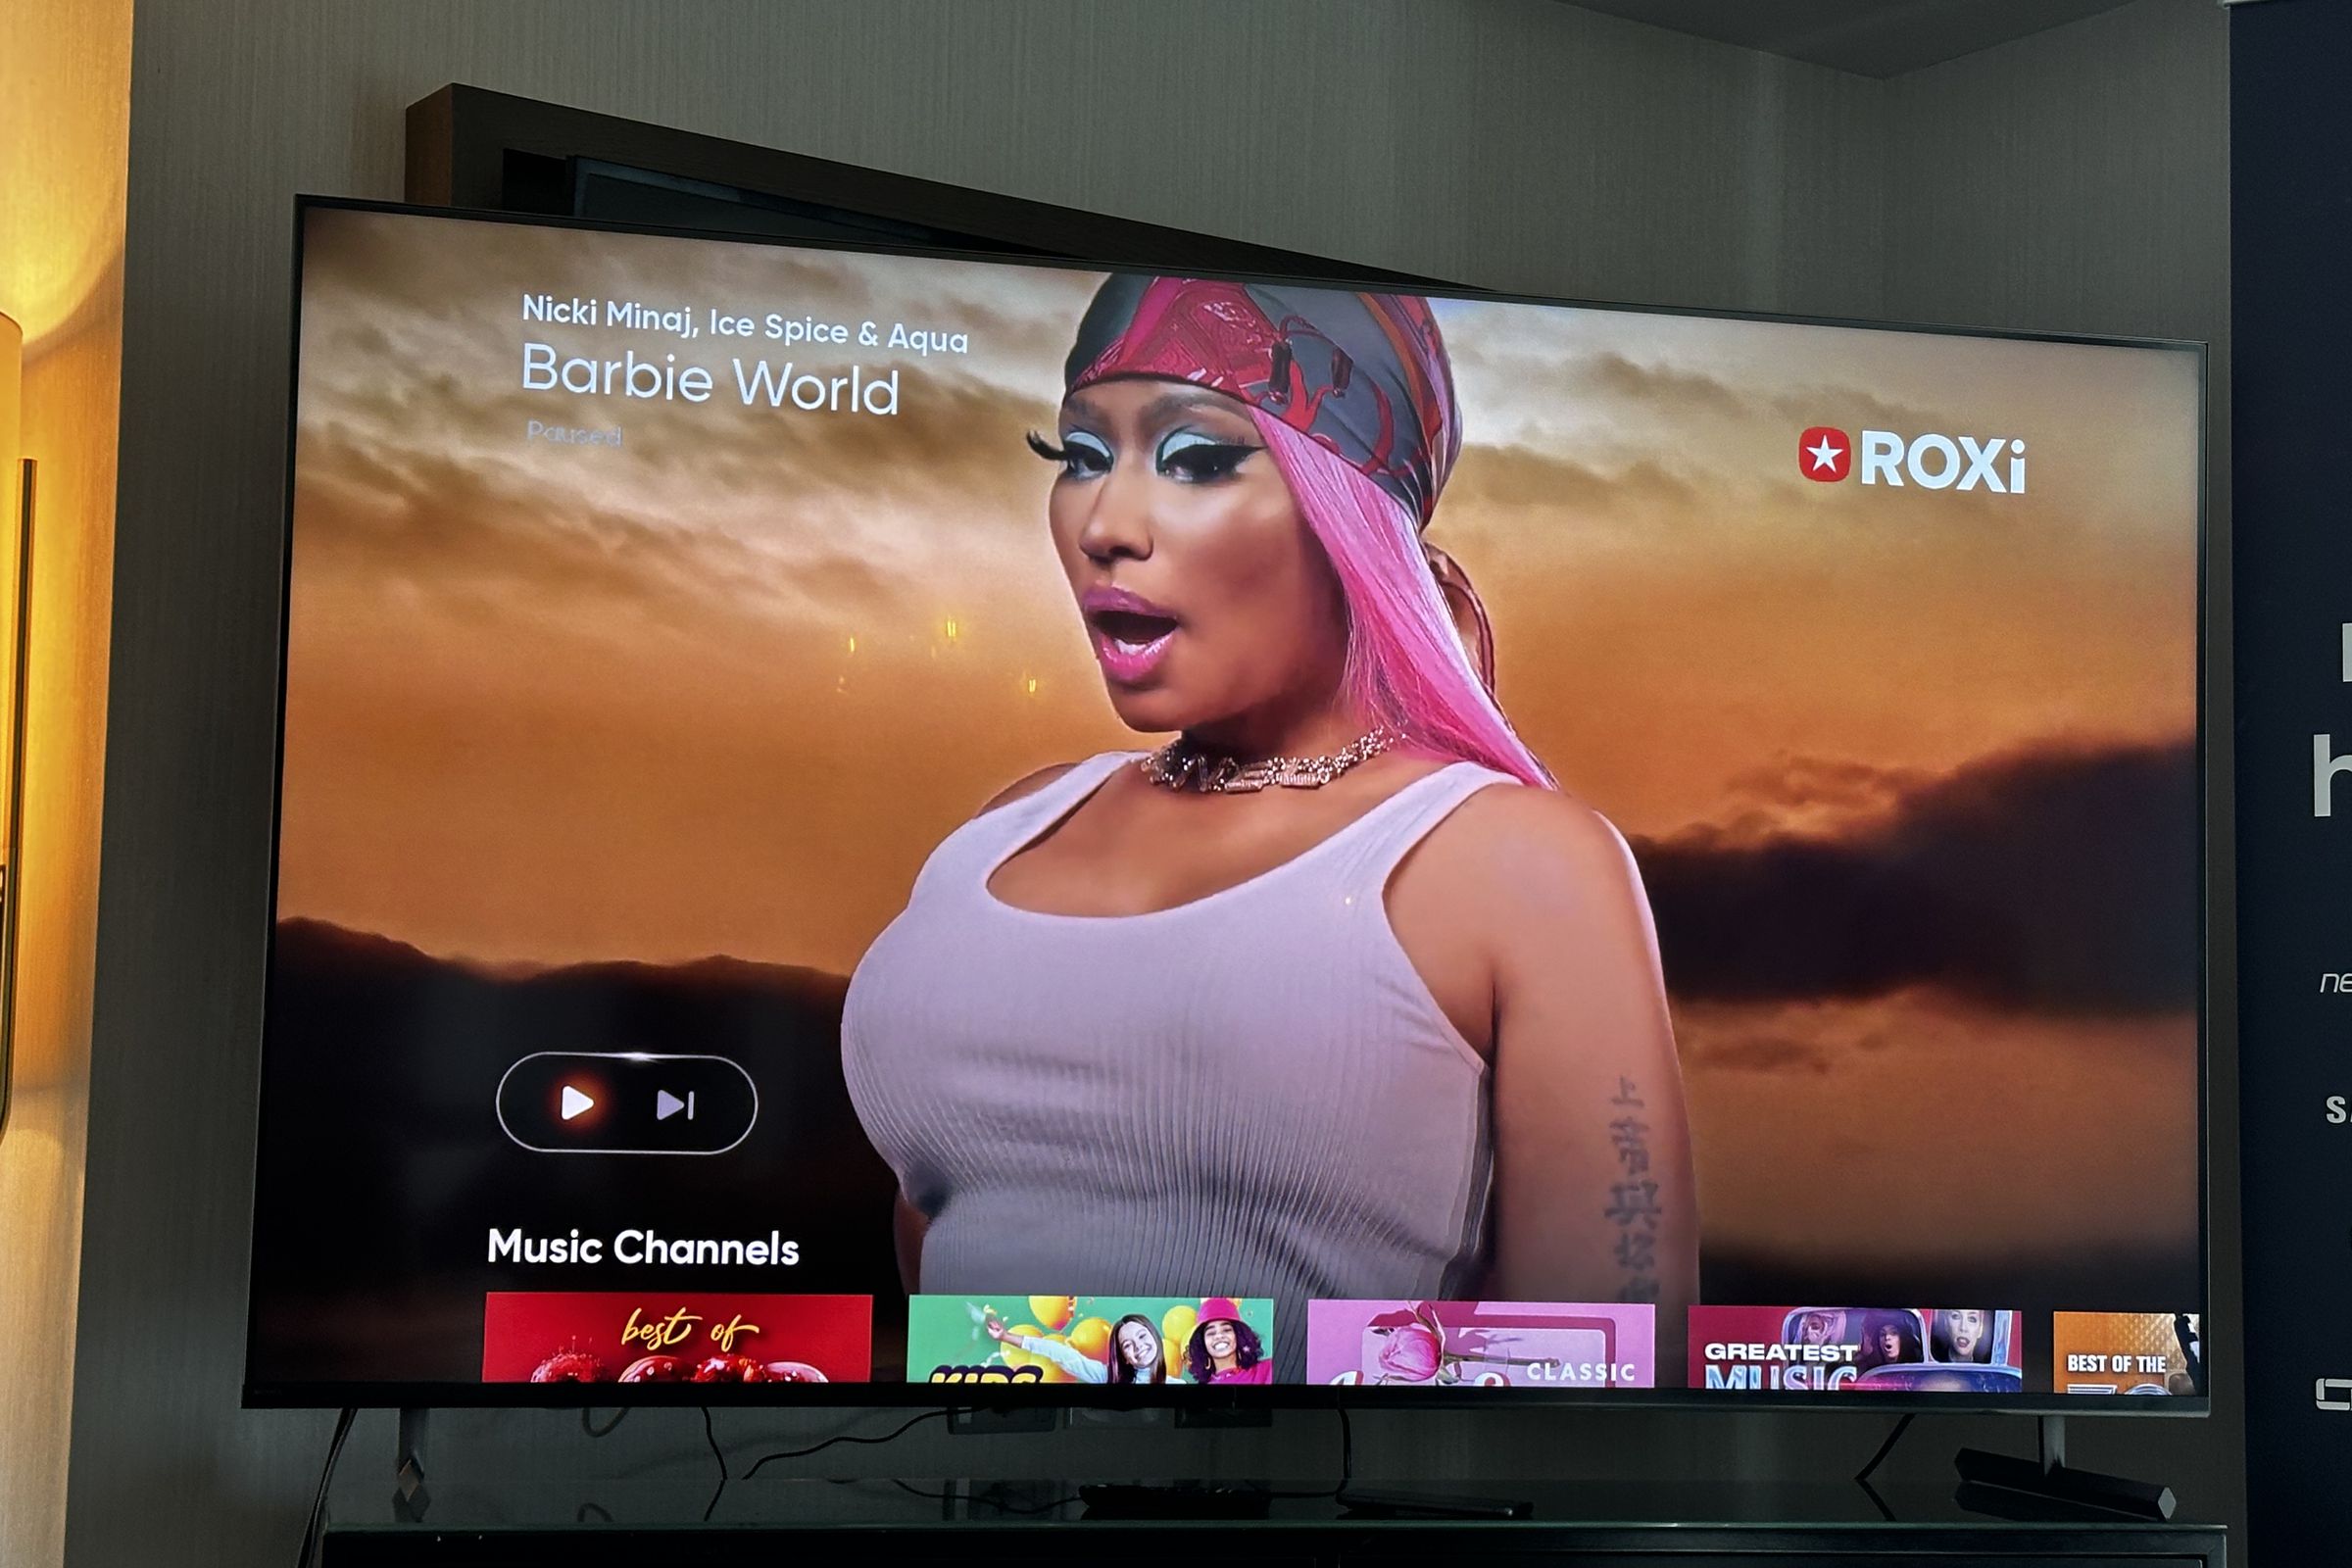 An image of a Nicki Minaj on a TV screen. The screen is paused with a prominent UI, including a play and skip button.